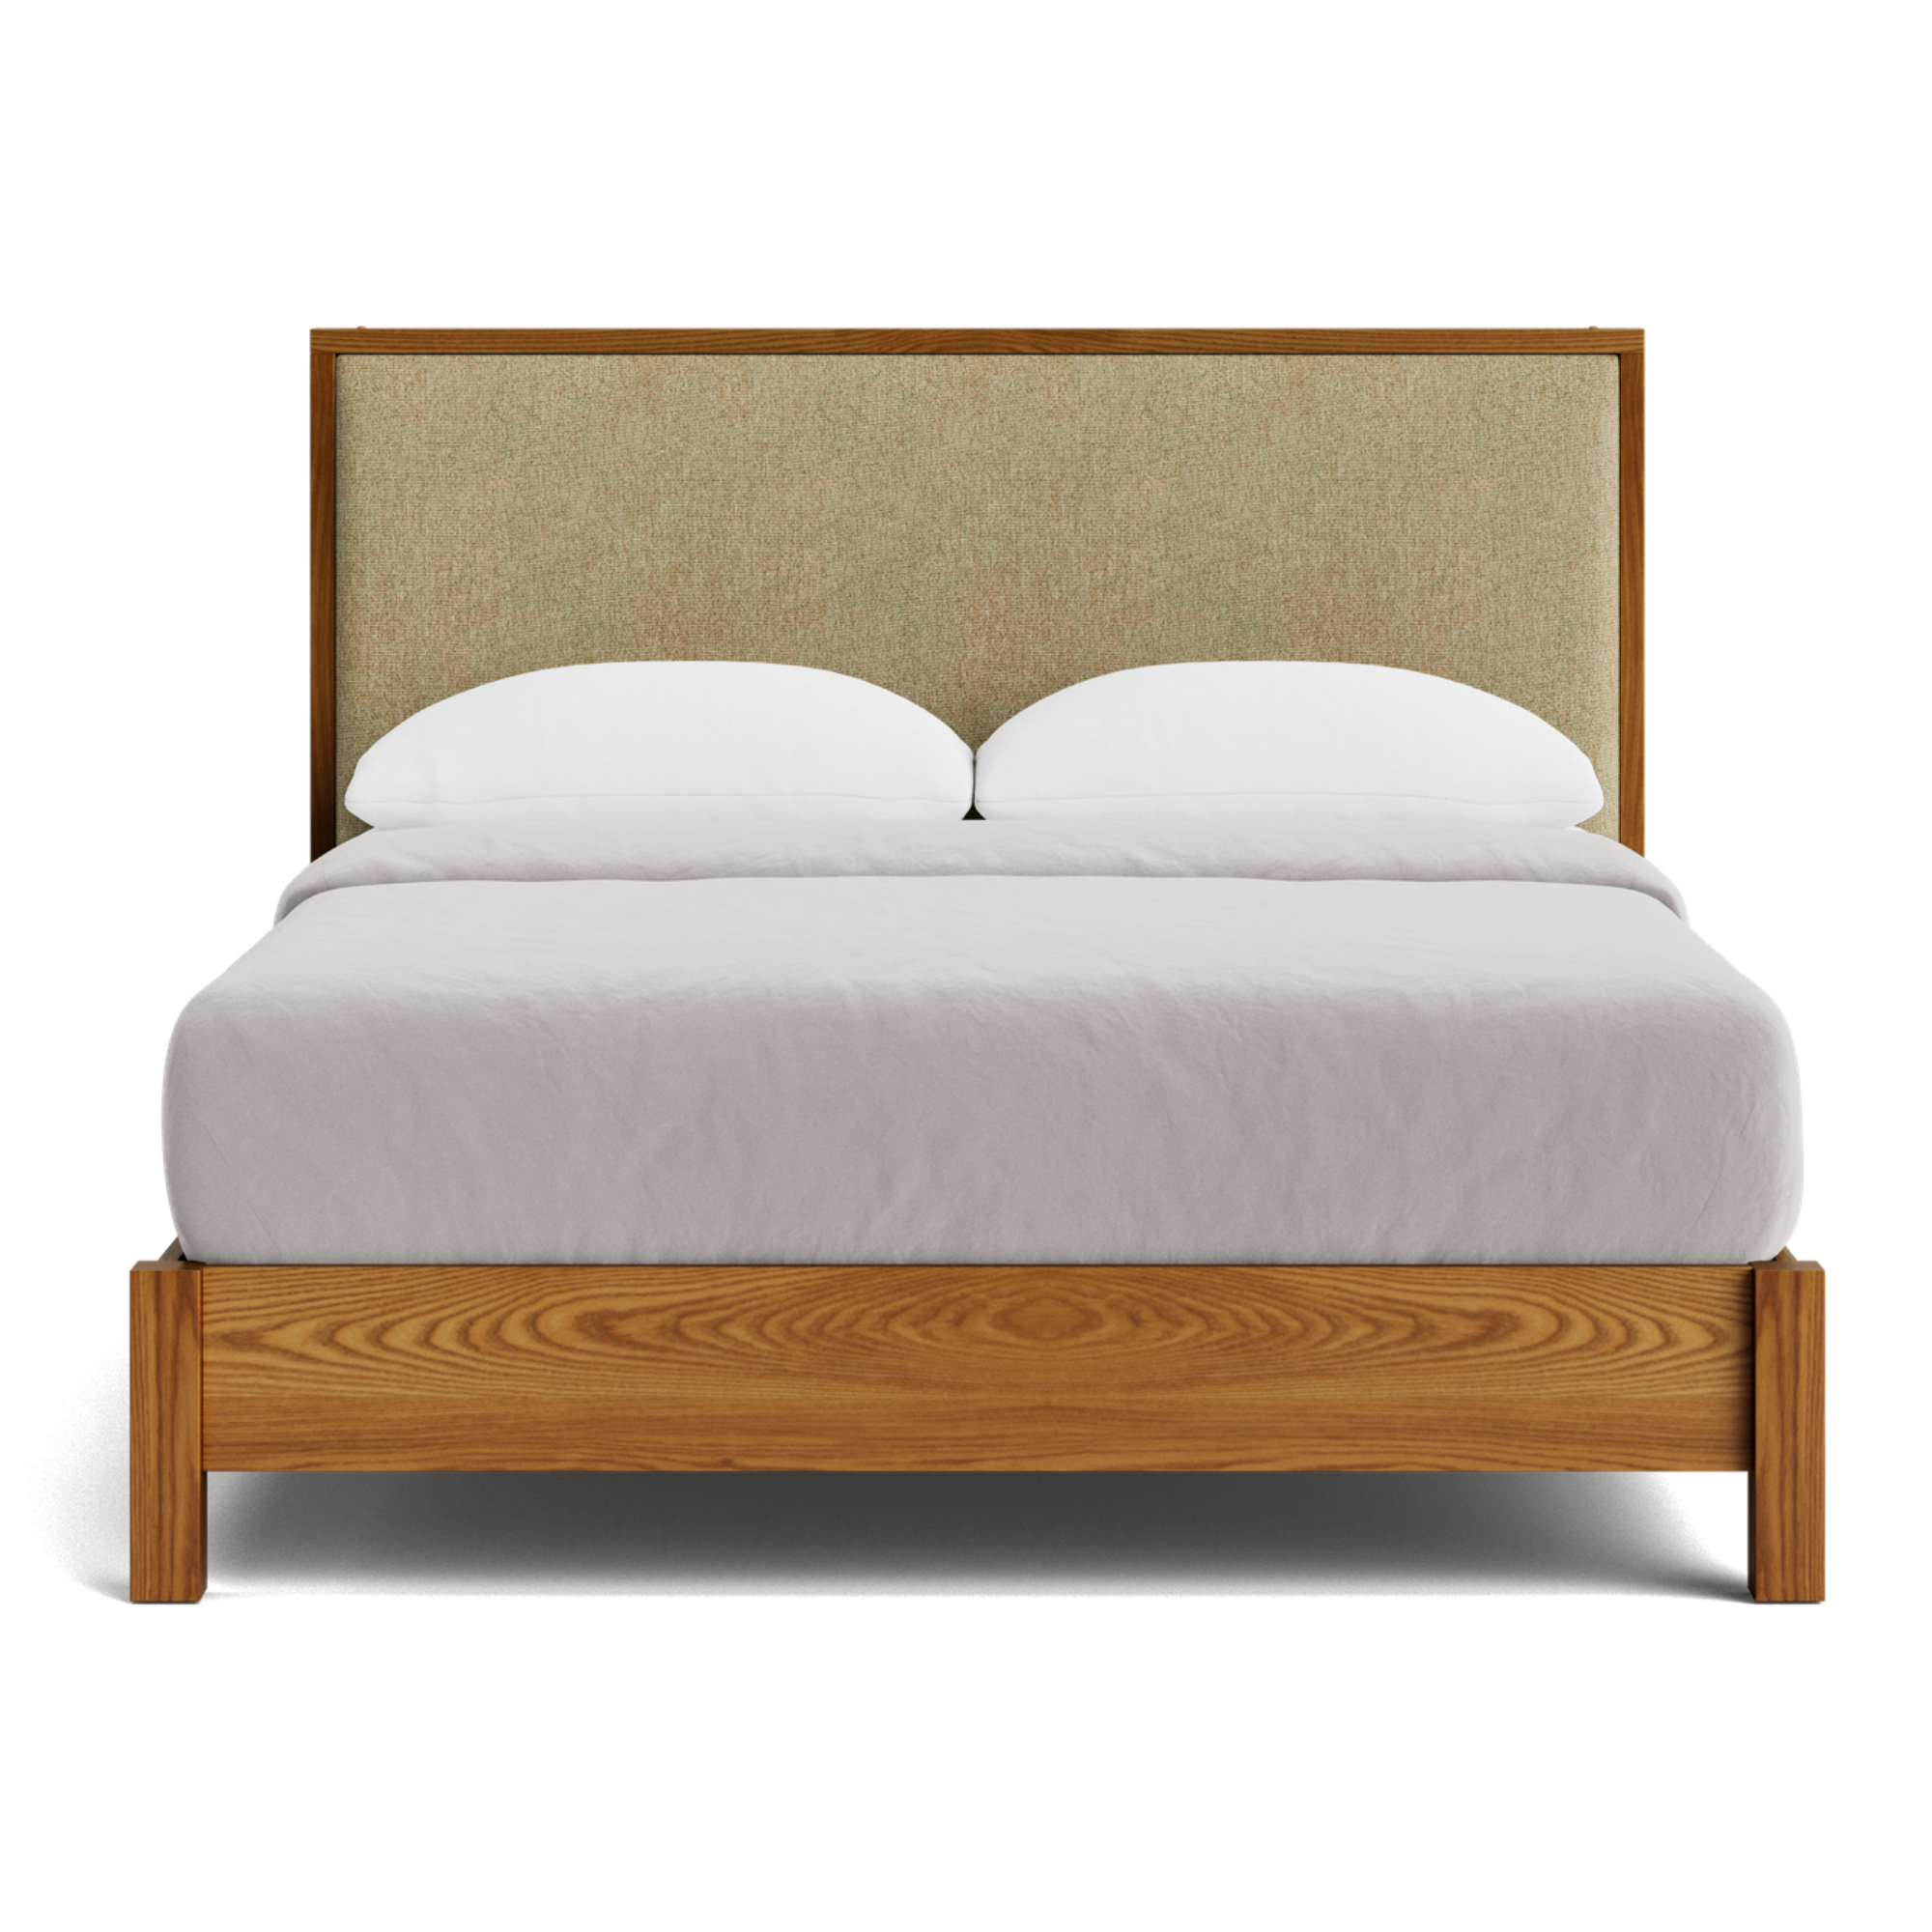 ANDES LOW-FOOT SLAT BED WITH UPHOLSTERED HEADBOARD | NZ MADE